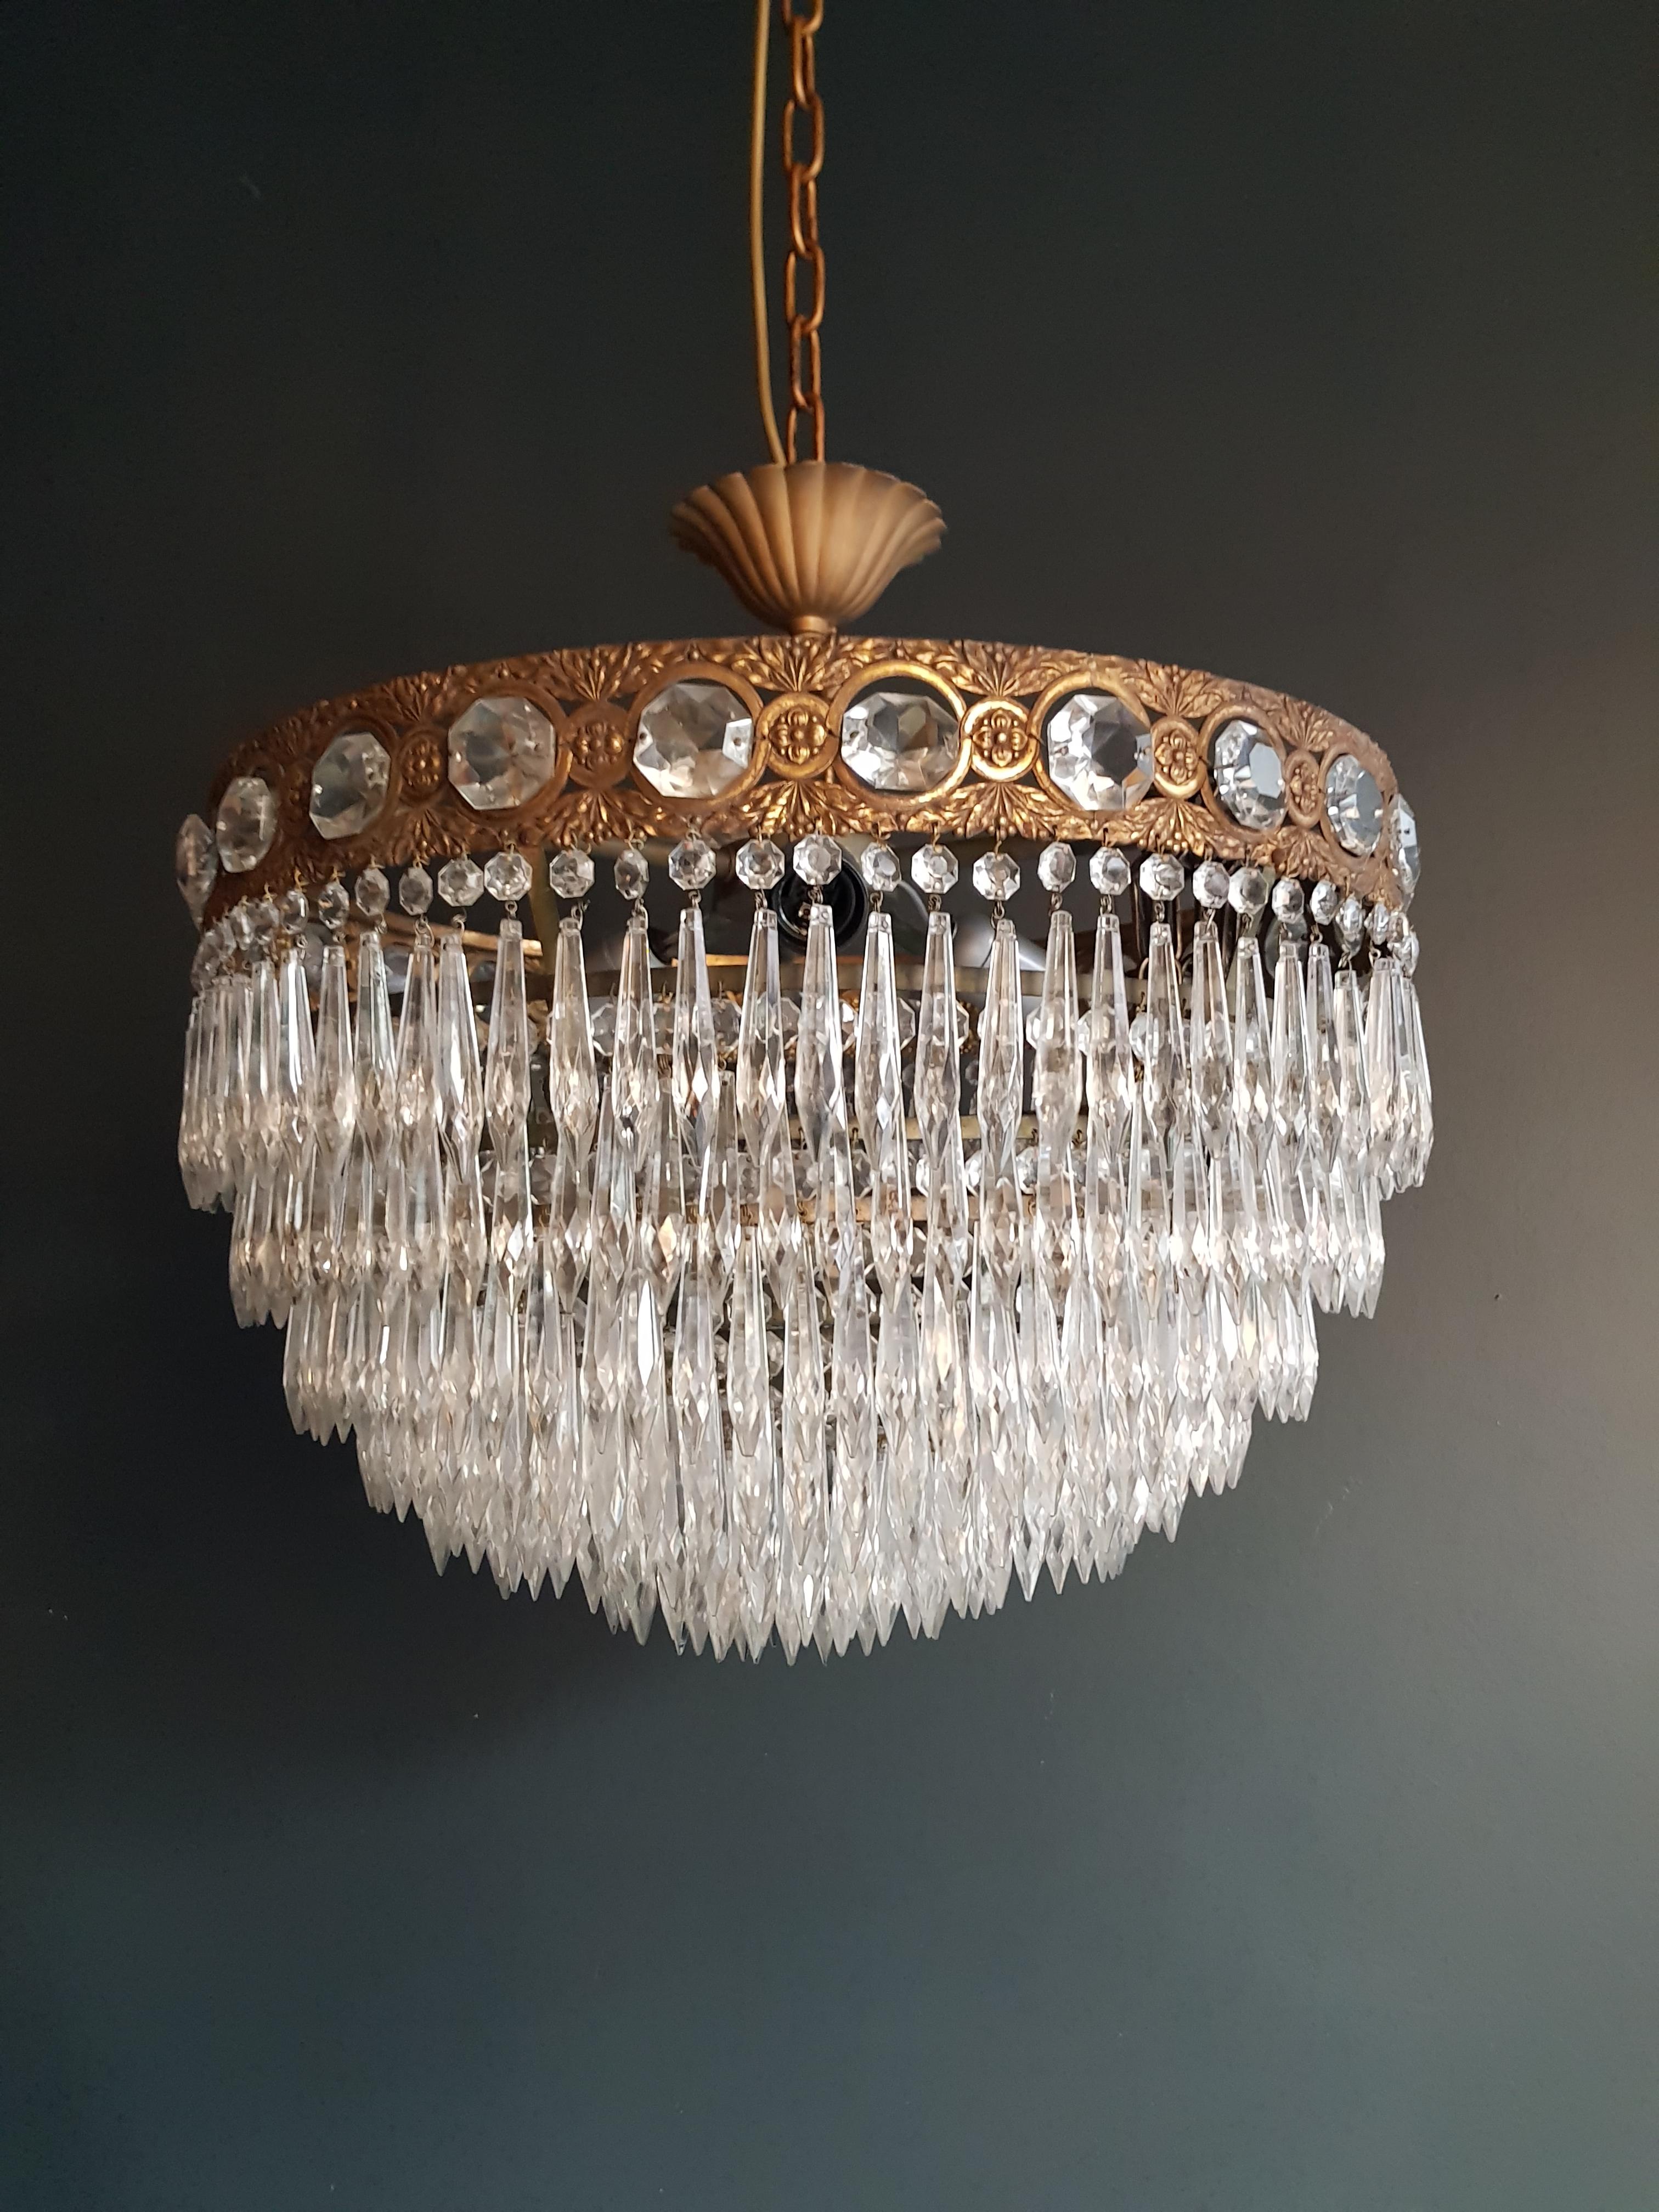 Low ceiling crystal chandelier brass.
Cabling completely renewed. Crystal hand-knotted.
Measures: Total height 55 cm, height without chain 38 cm, diameter 48 cm. weight (approximately) 9kg.

Number of lights: three-light bulb sockets: E27
Brass